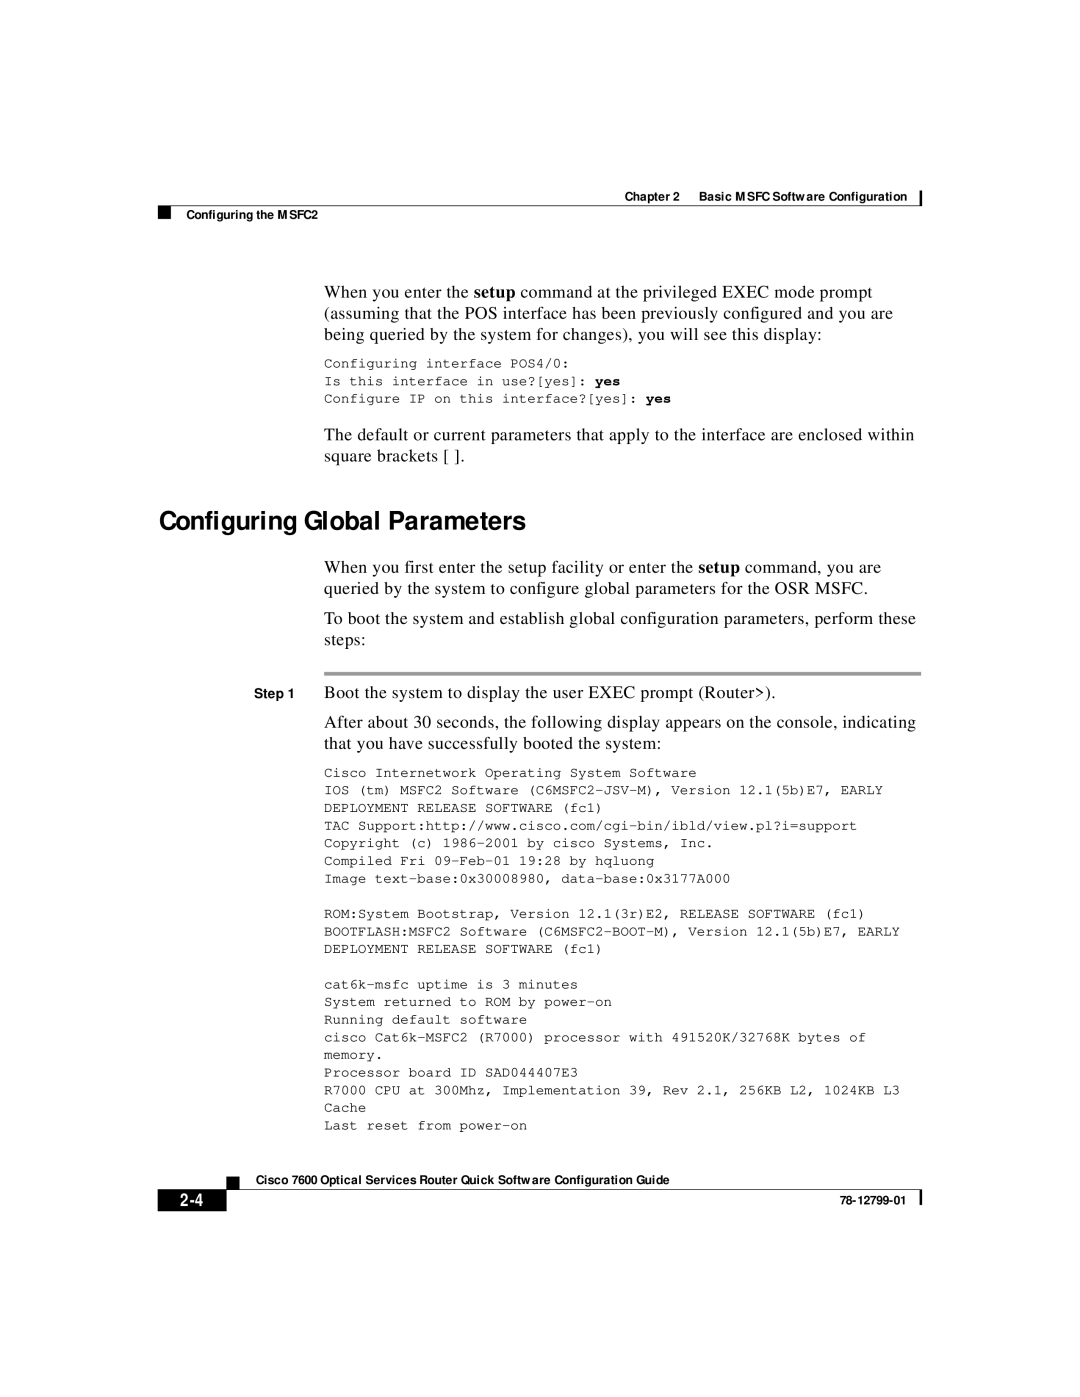 Cisco Systems 7600 manual Configuring Global Parameters 